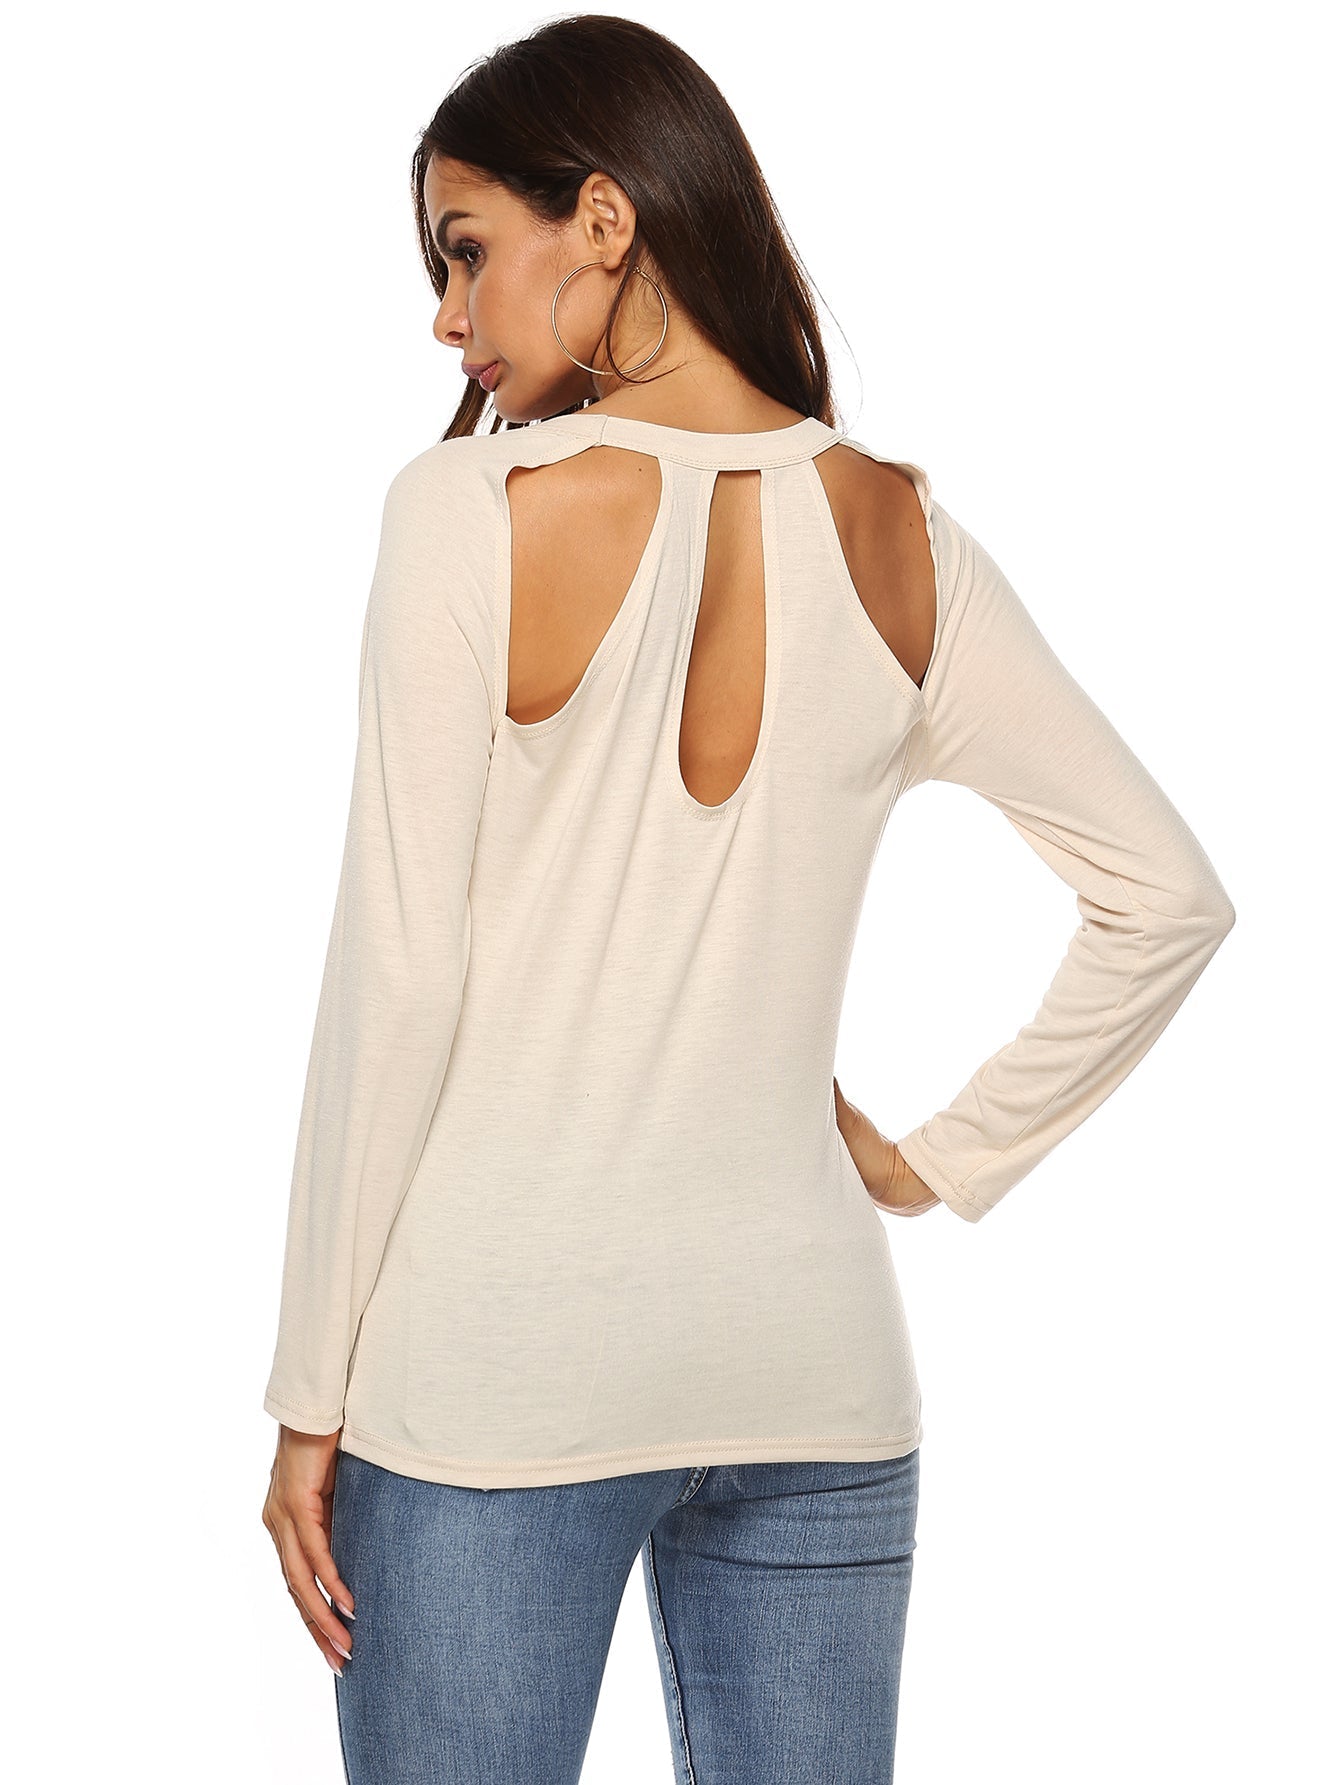 Scoop Neck Cut Out Tee Sai Feel